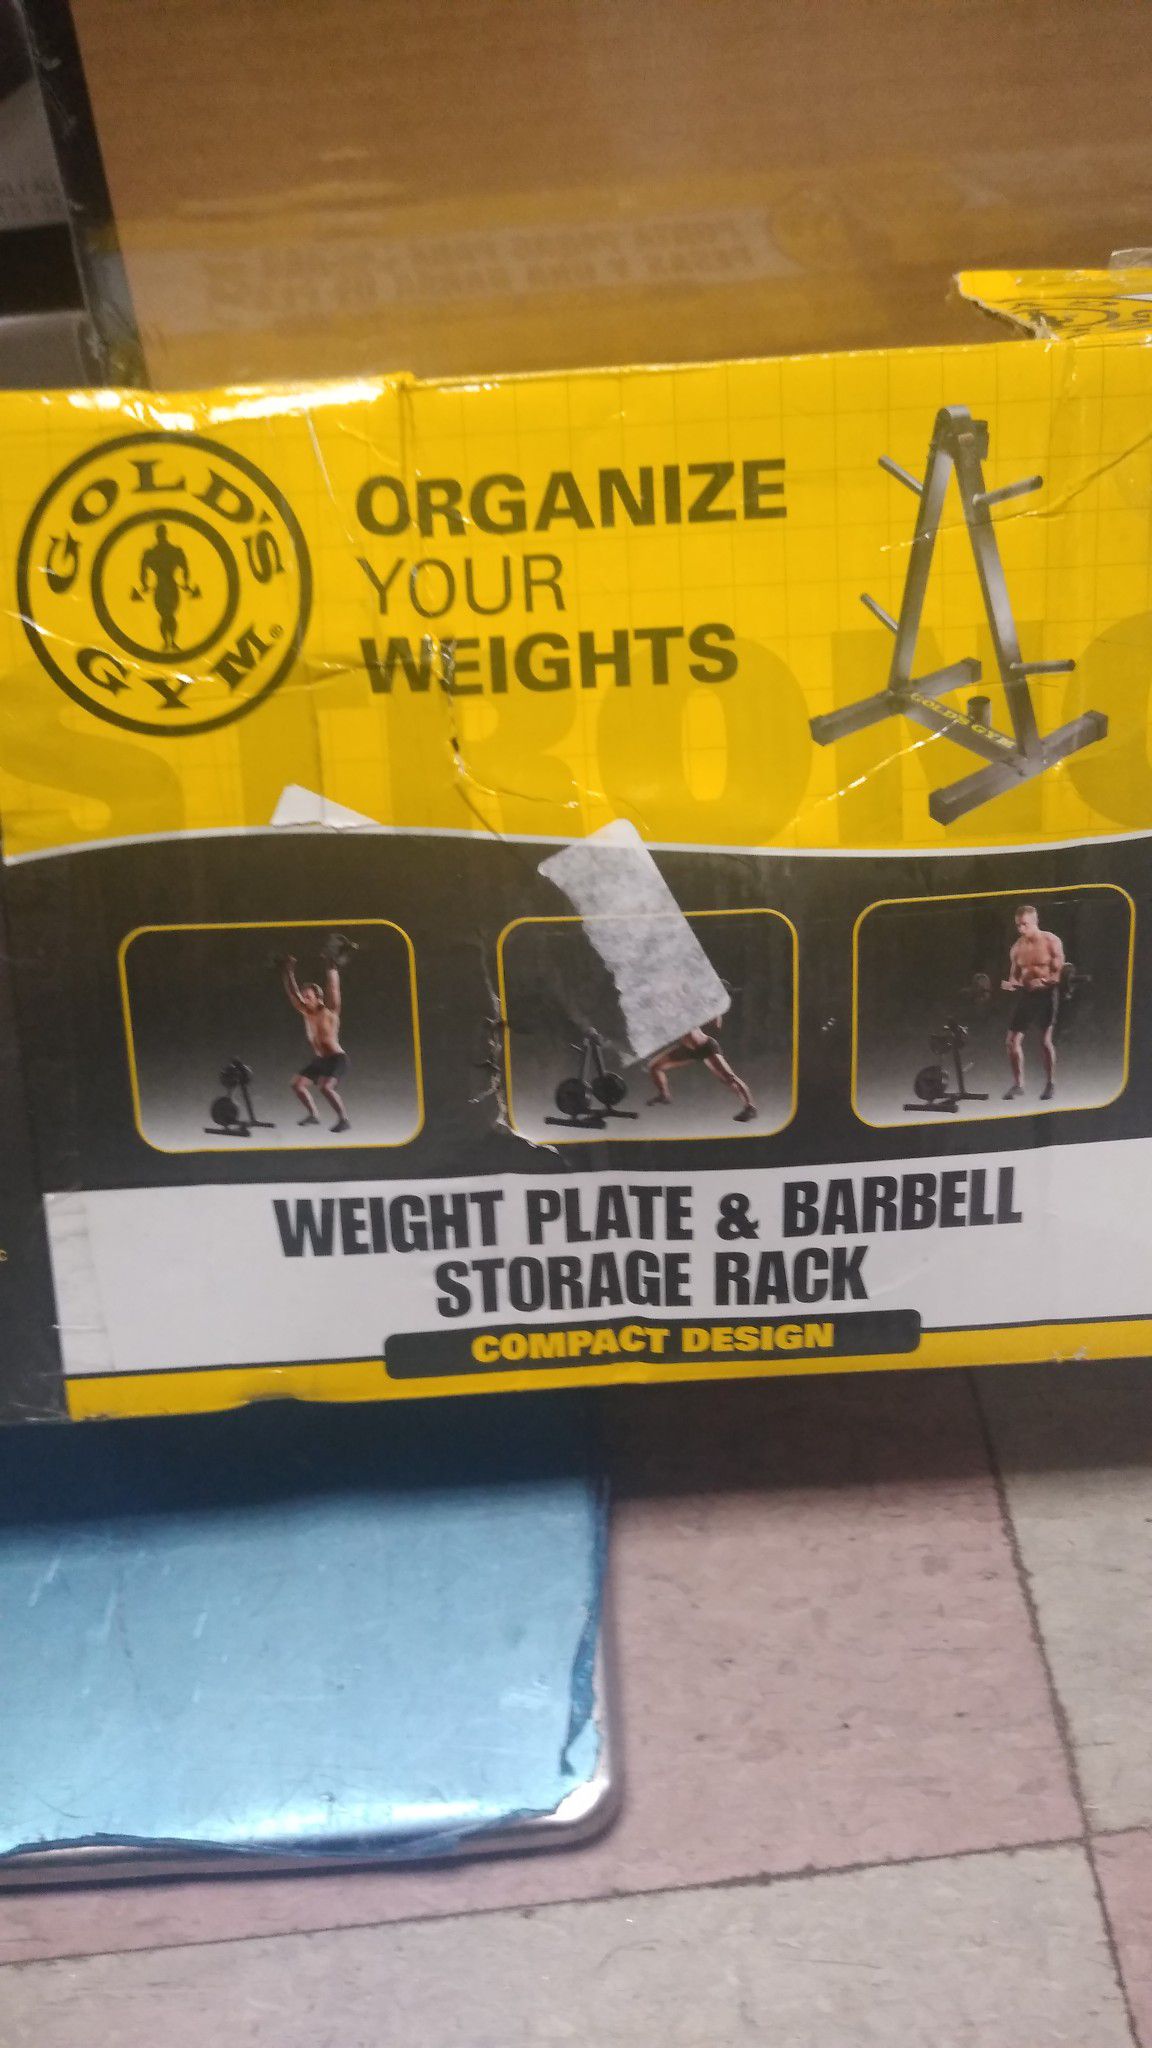 Gold's Gym weight plate and barbell storage rack compact design